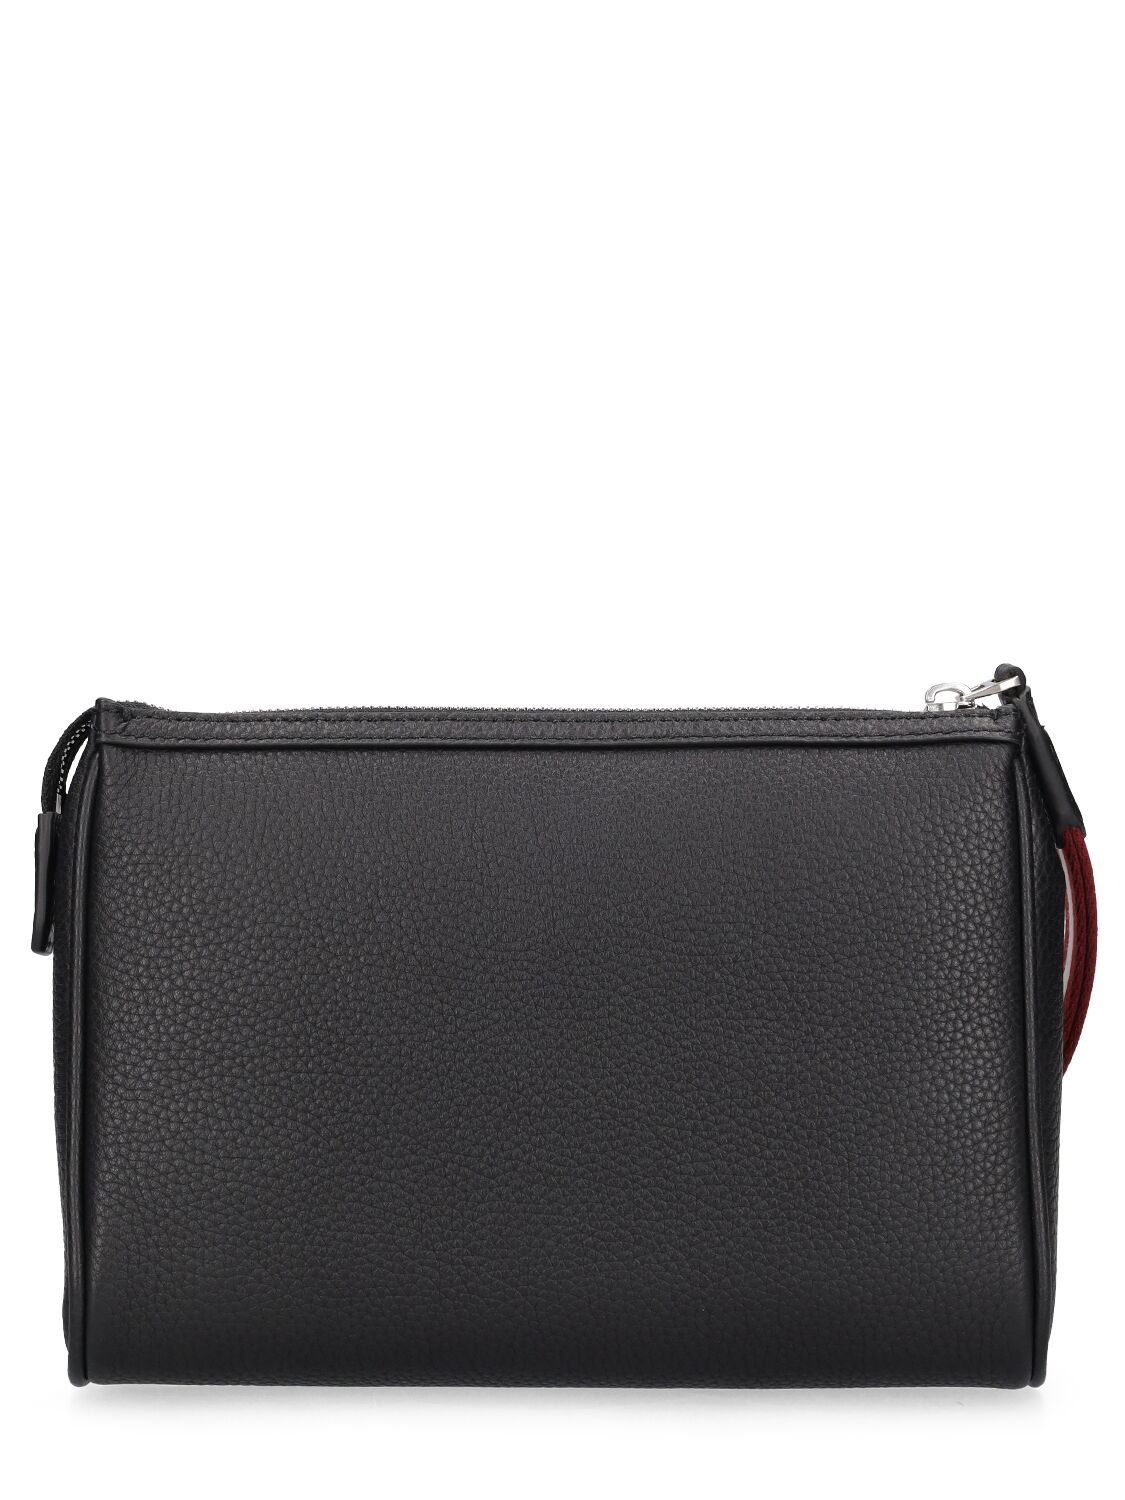 Shop Bally Code Leather Clutch In Black